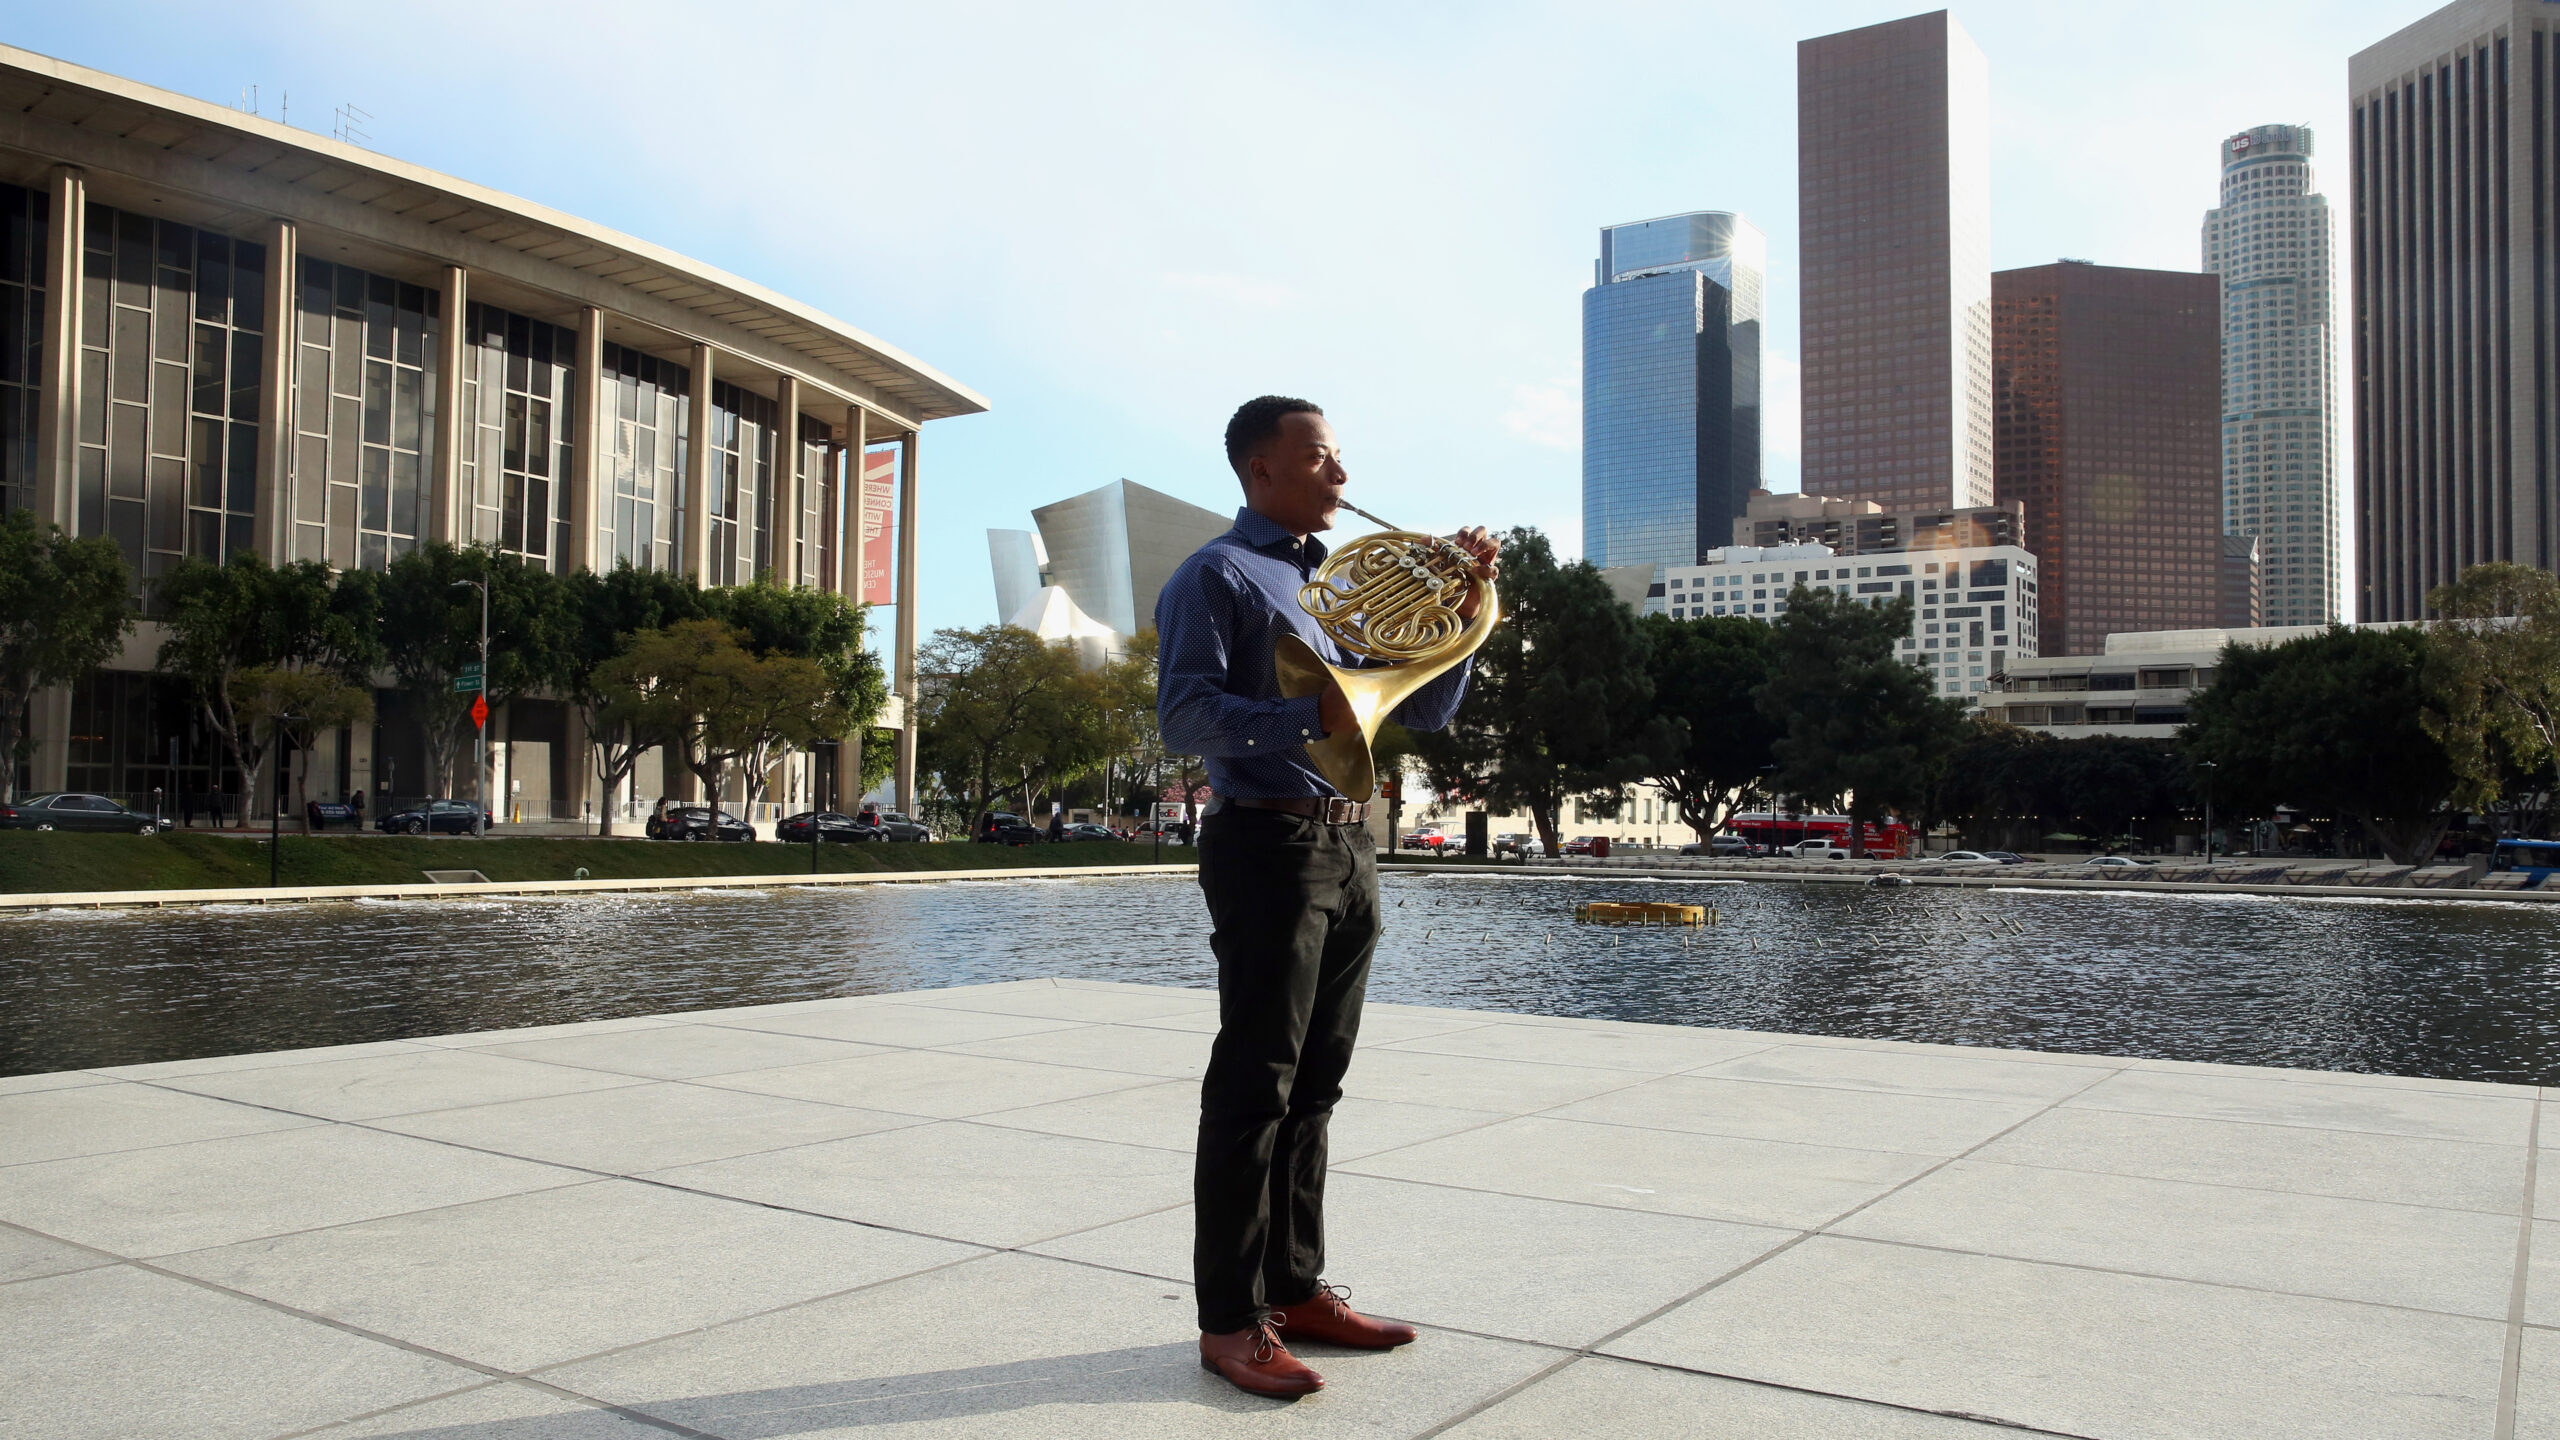 Man stands in downtown LA holding french horn